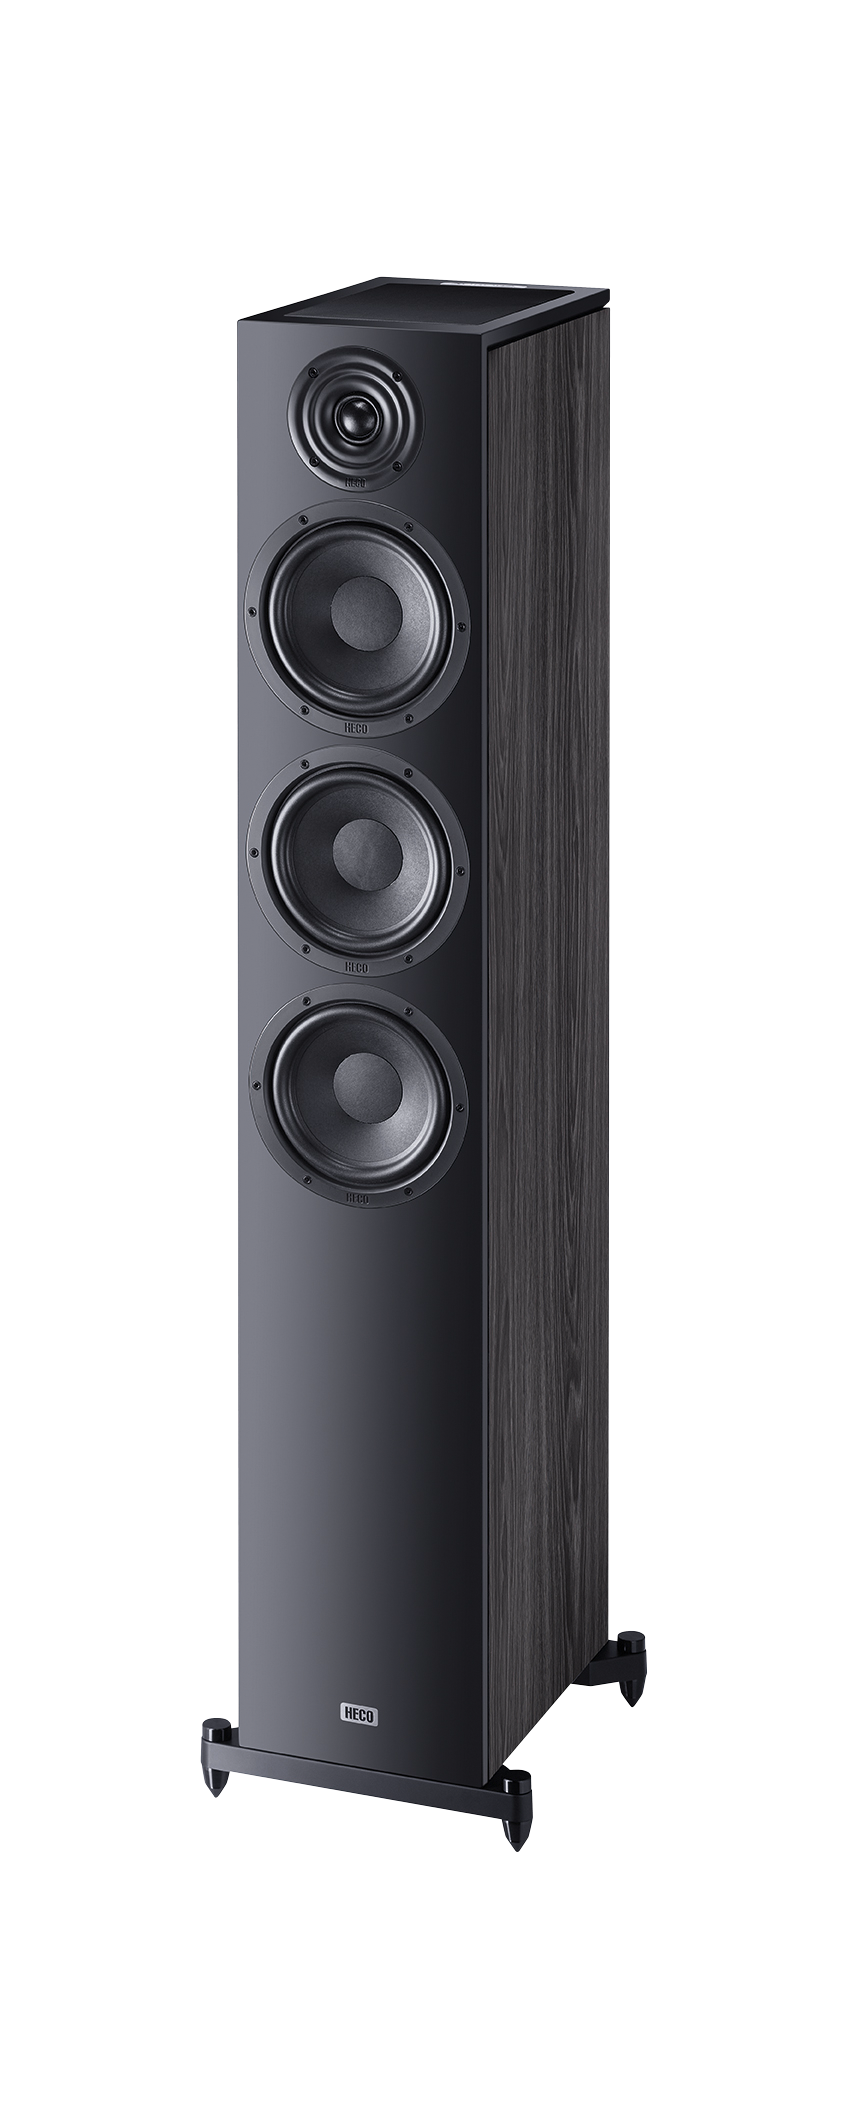 Aurora 900 AM, Innovative floorstanding unit with integrated Dolby Atmos speaker